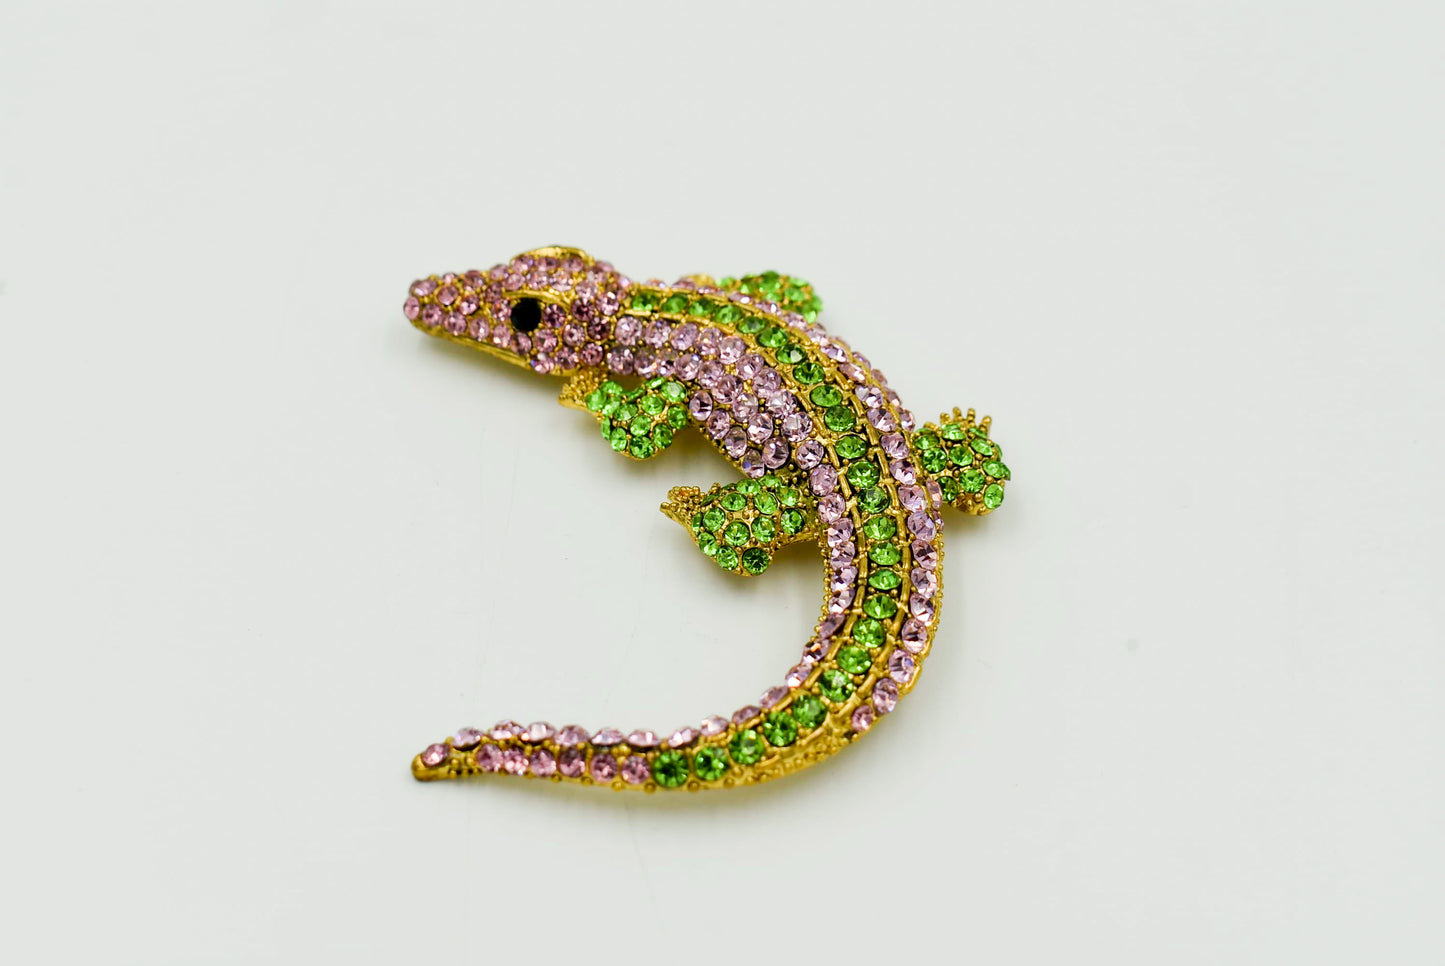 Large Alligator Pins in Different Colors Black, Clear, Amber, Green, and Pink/Green